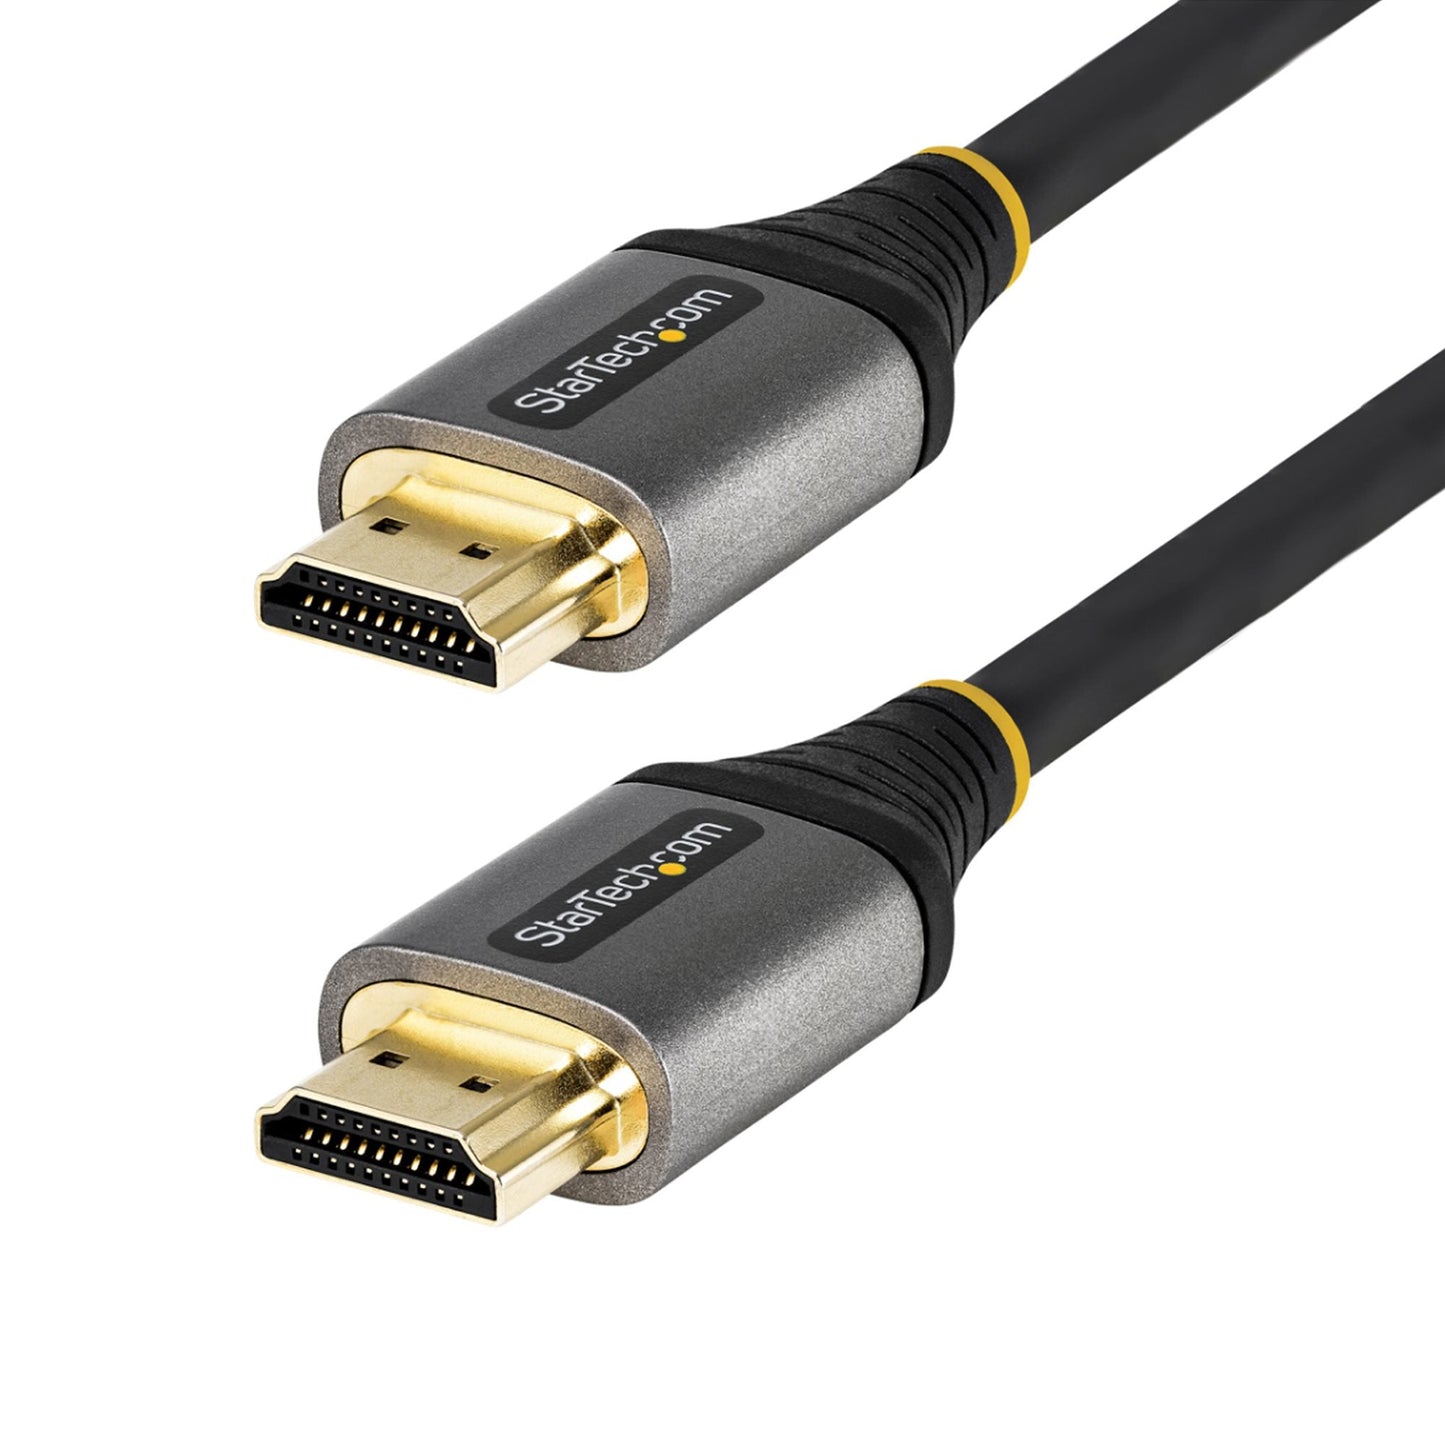 Startech.Com 10Ft (3M) Hdmi 2.1 Cable 8K - Certified Ultra High Speed Hdmi Cable 48Gbps - 8K 60Hz/4K